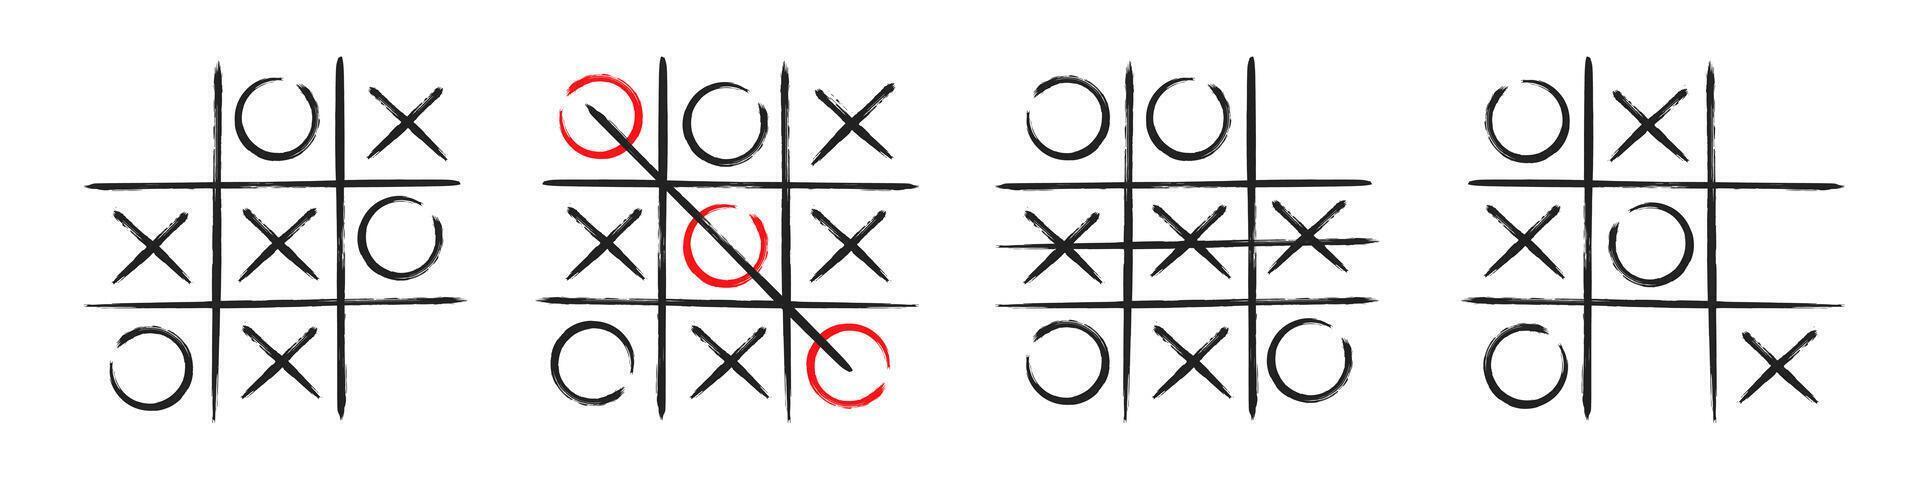 Tic tac toe xo game hand drawn grid doodle template illustration set isolated on white background vector